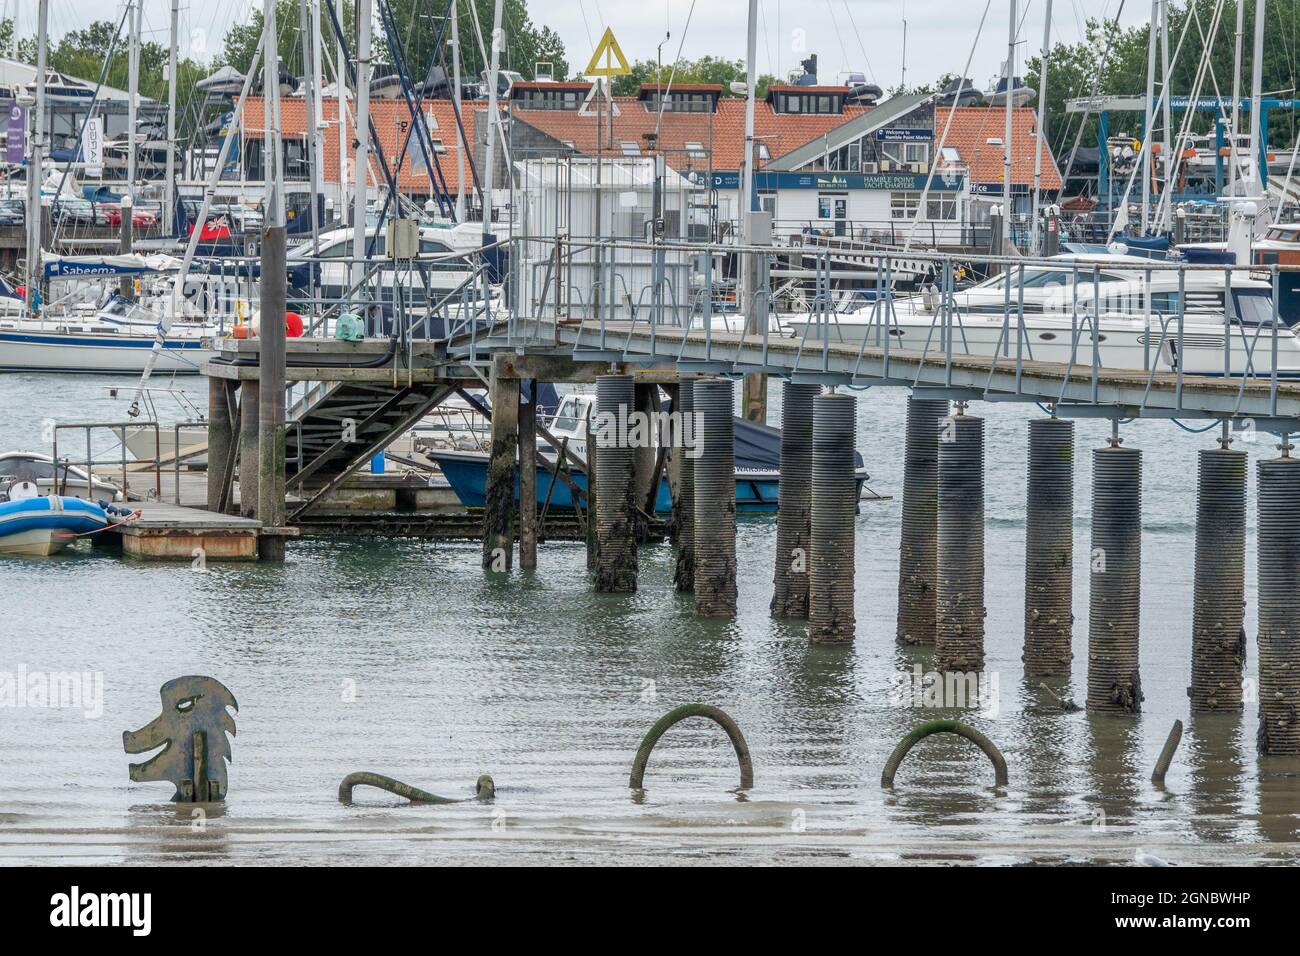 metal sculpture of the Loch Ness Monster in the water at Warsash Hampshire England Stock Photo